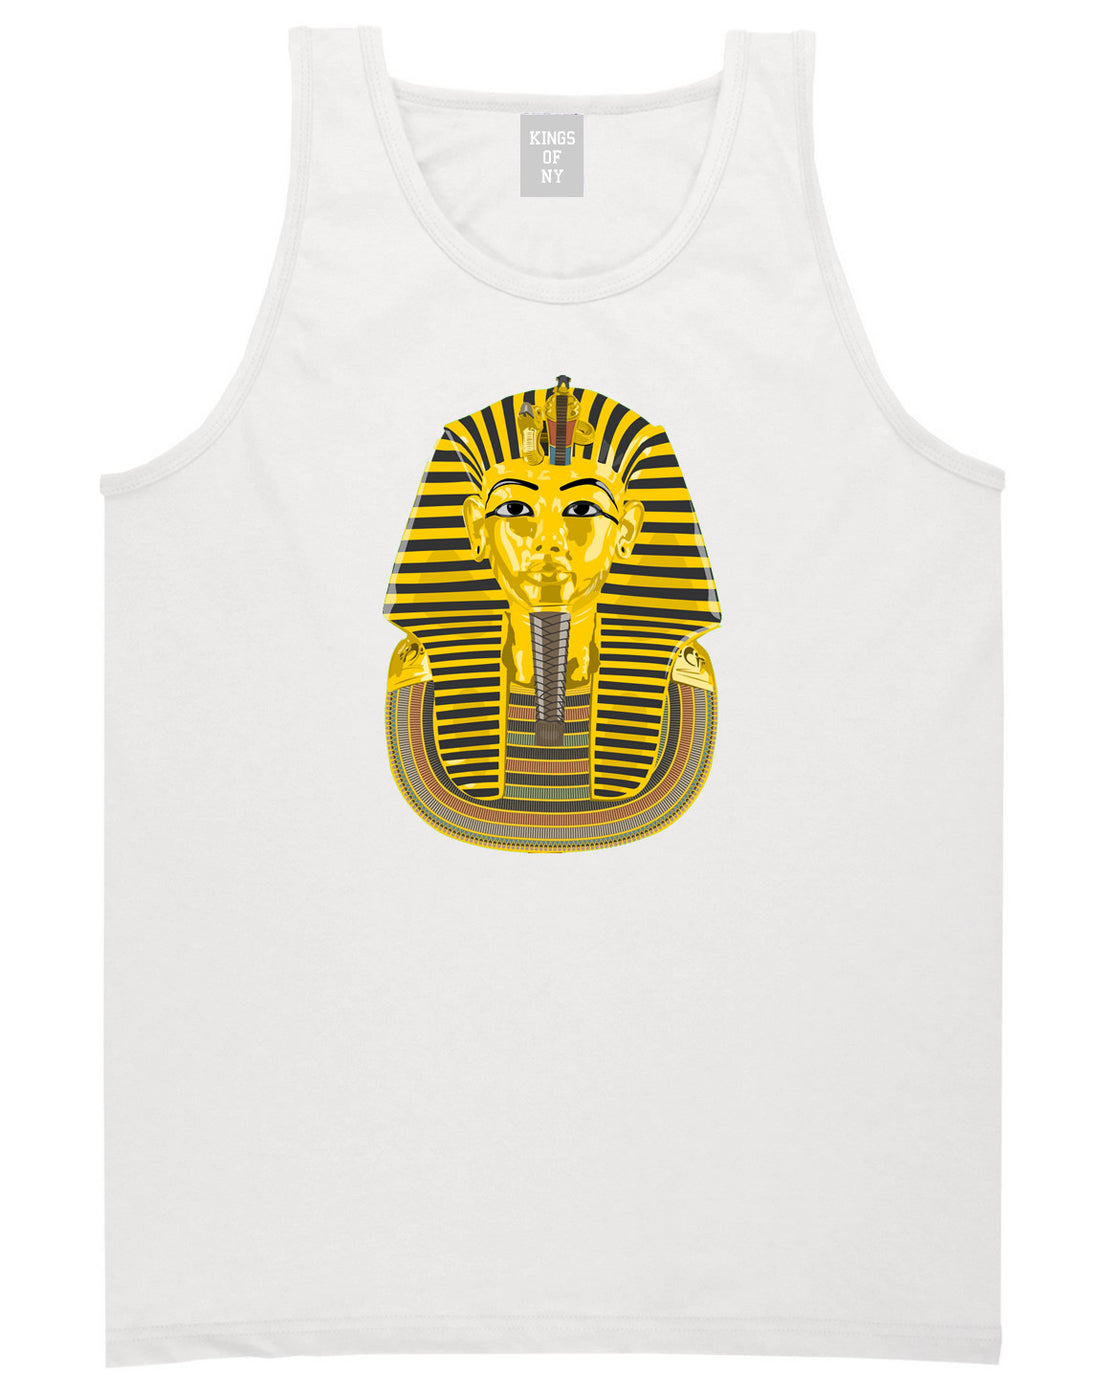 Pharaoh Egypt Gold Egyptian Head  Tank Top In White by Kings Of NY